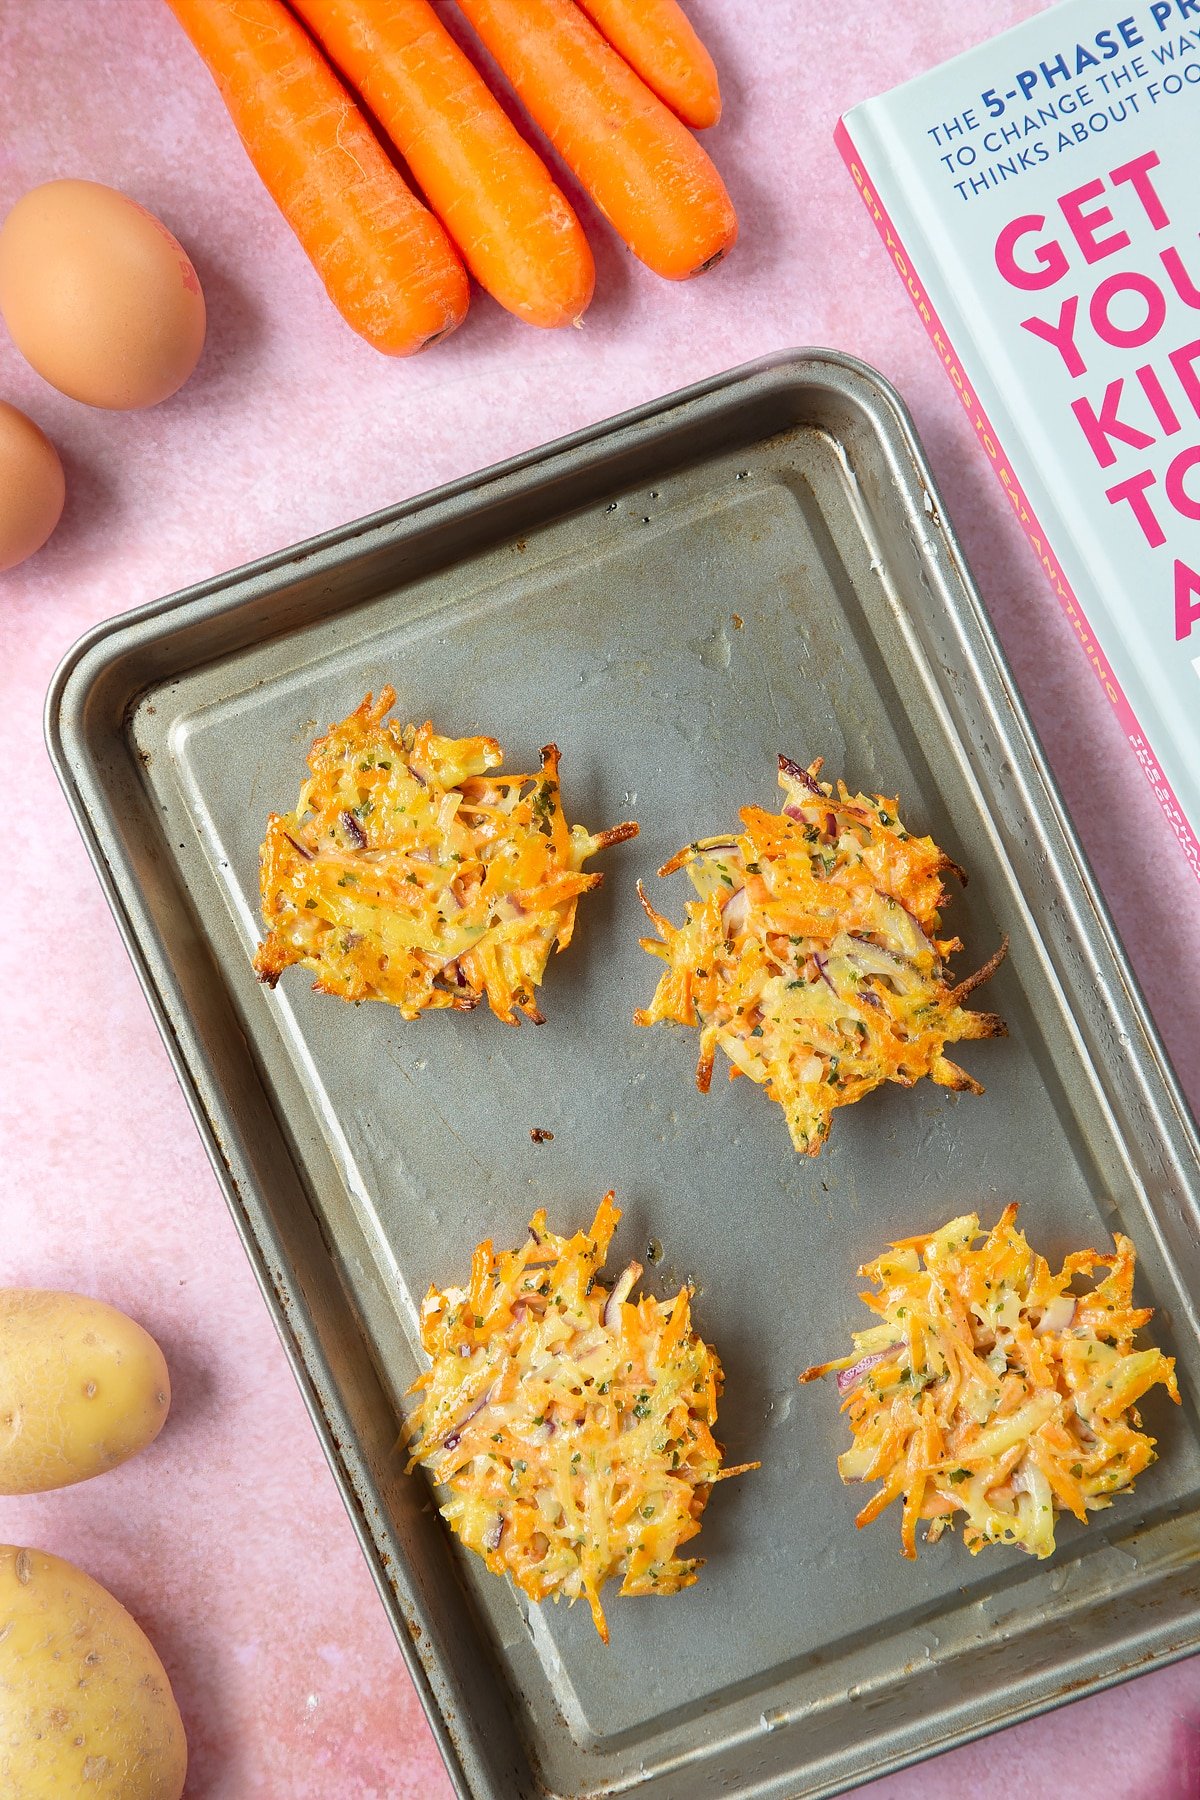 Four mounds of carrot patty mix on an oiled baking tray. The patties are flipped over to show the semi-cooked undersides. The tray is surrounded by ingredients to make carrot patties.